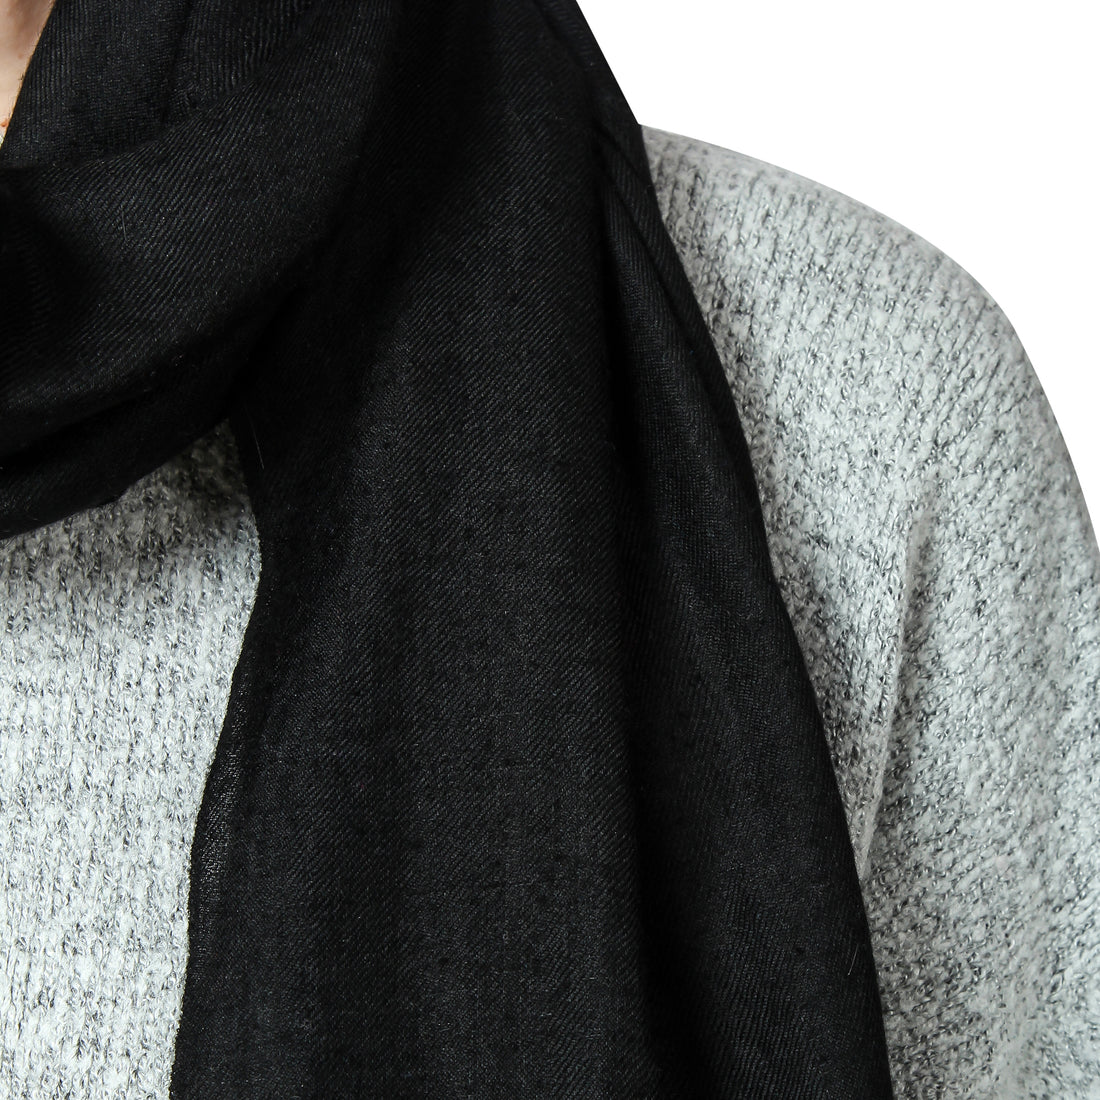 How to Care for Your Black Cashmere Scarf